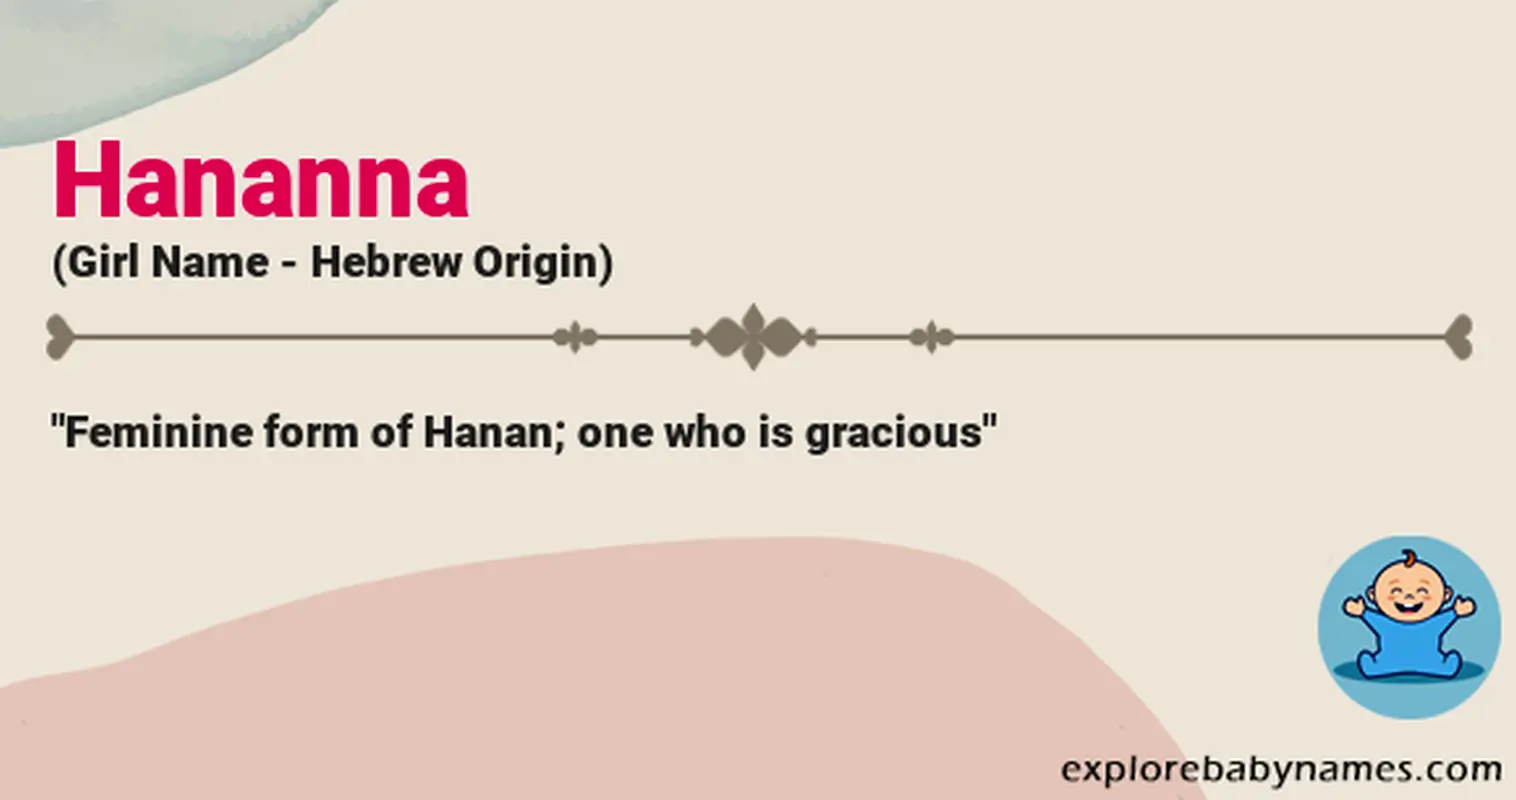 Meaning of Hananna